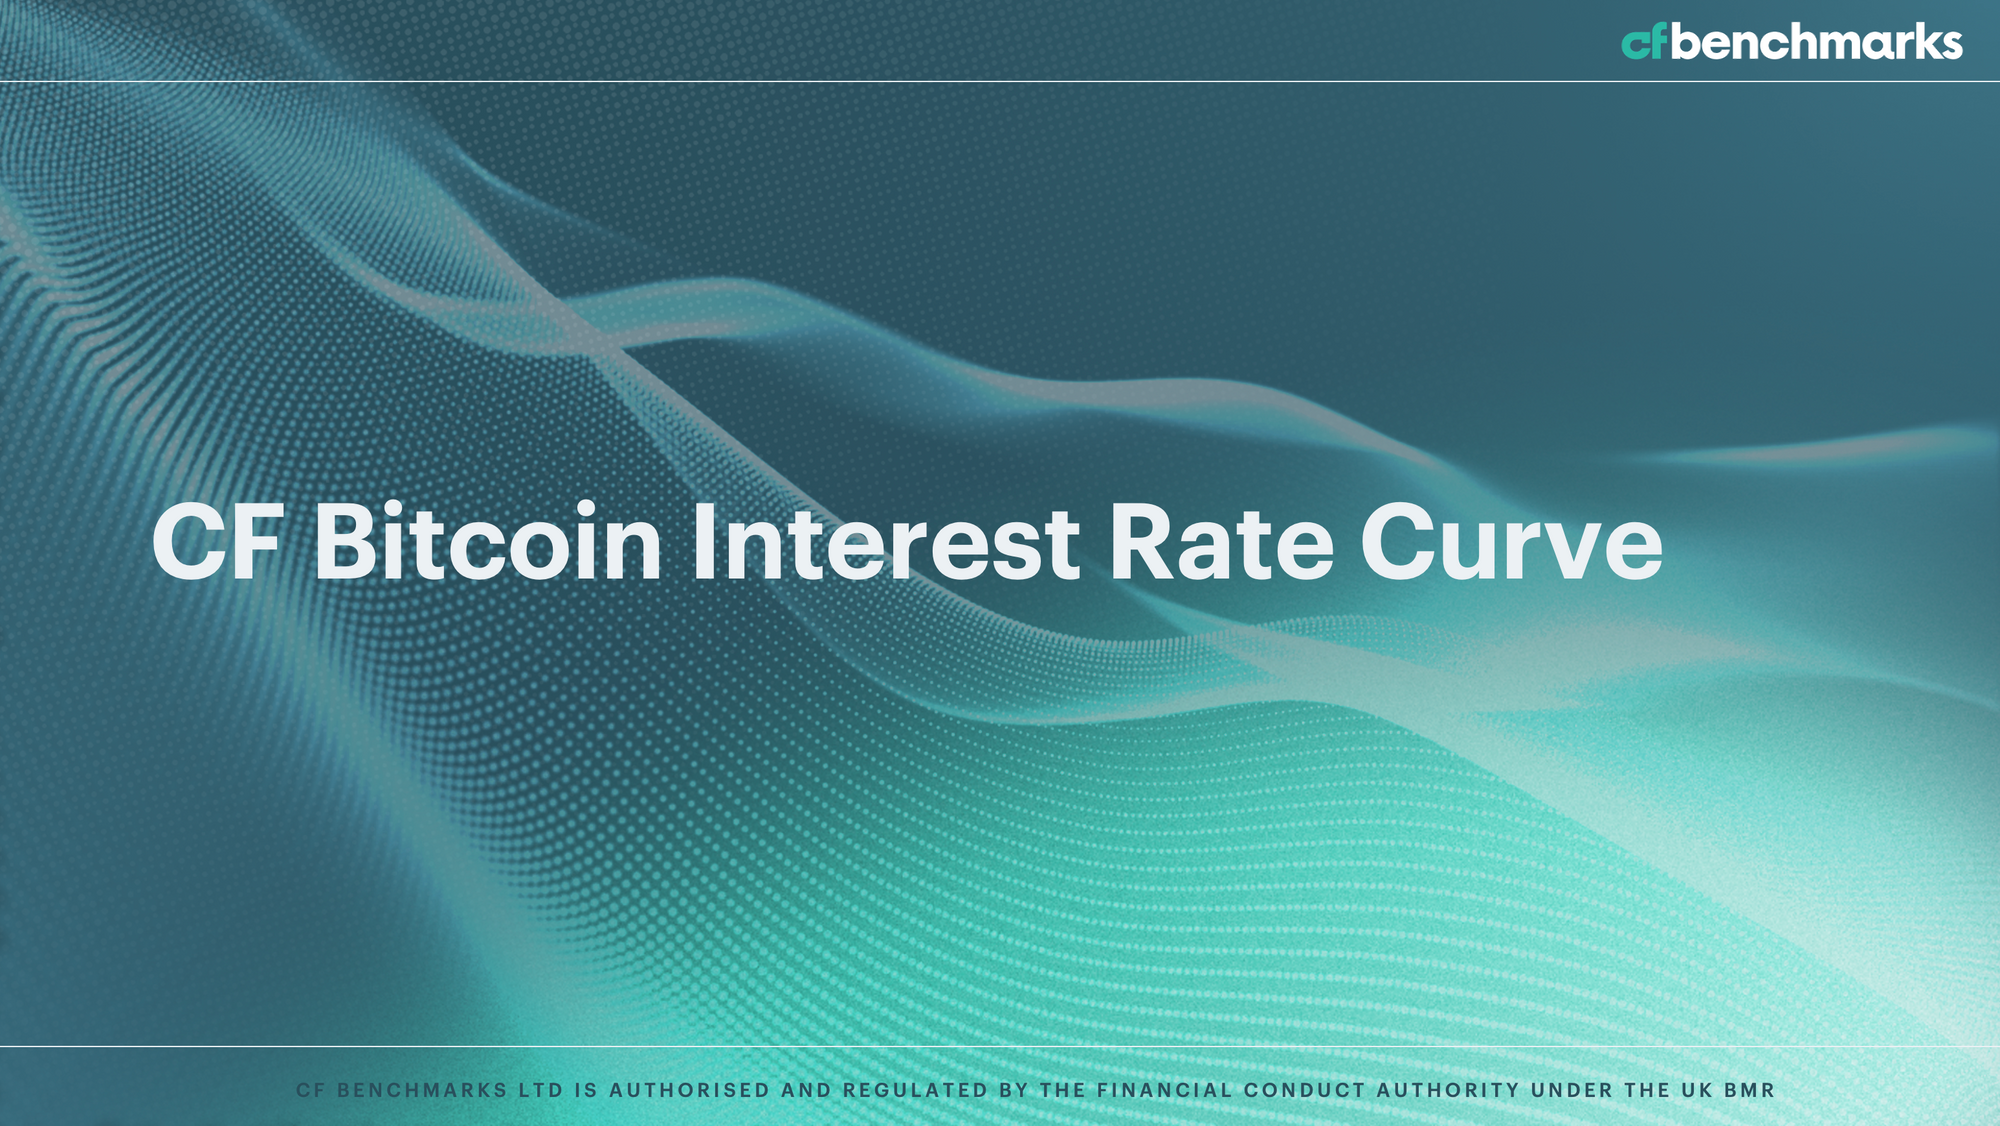 The CF Bitcoin Interest Rate Curve 'Reality Check'